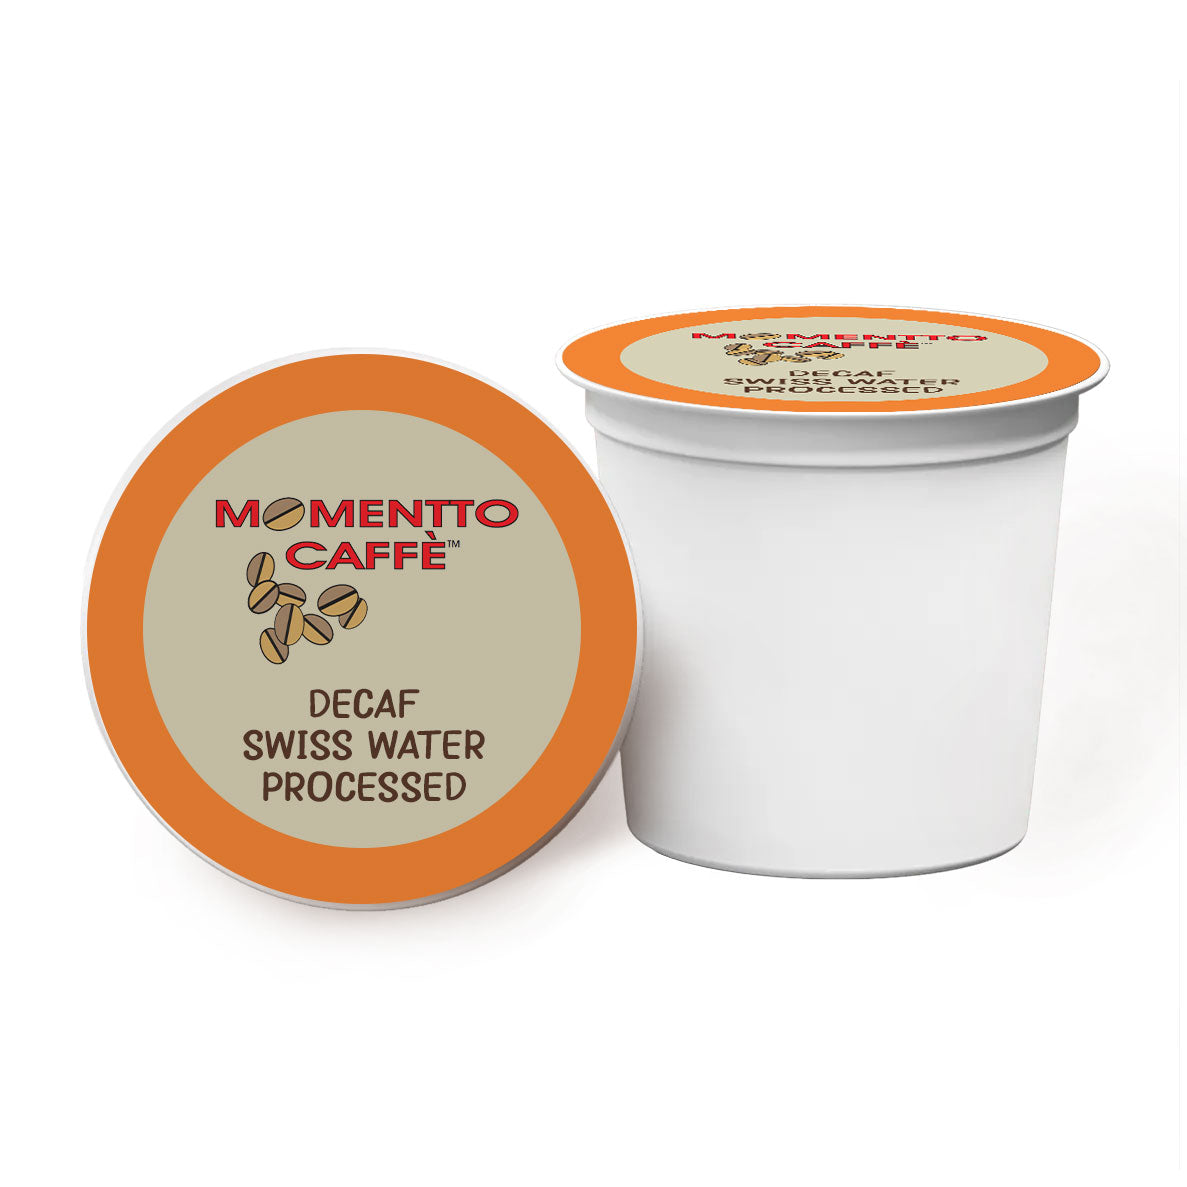 SWISS WATER PROCESSED DECAF K-CUPS